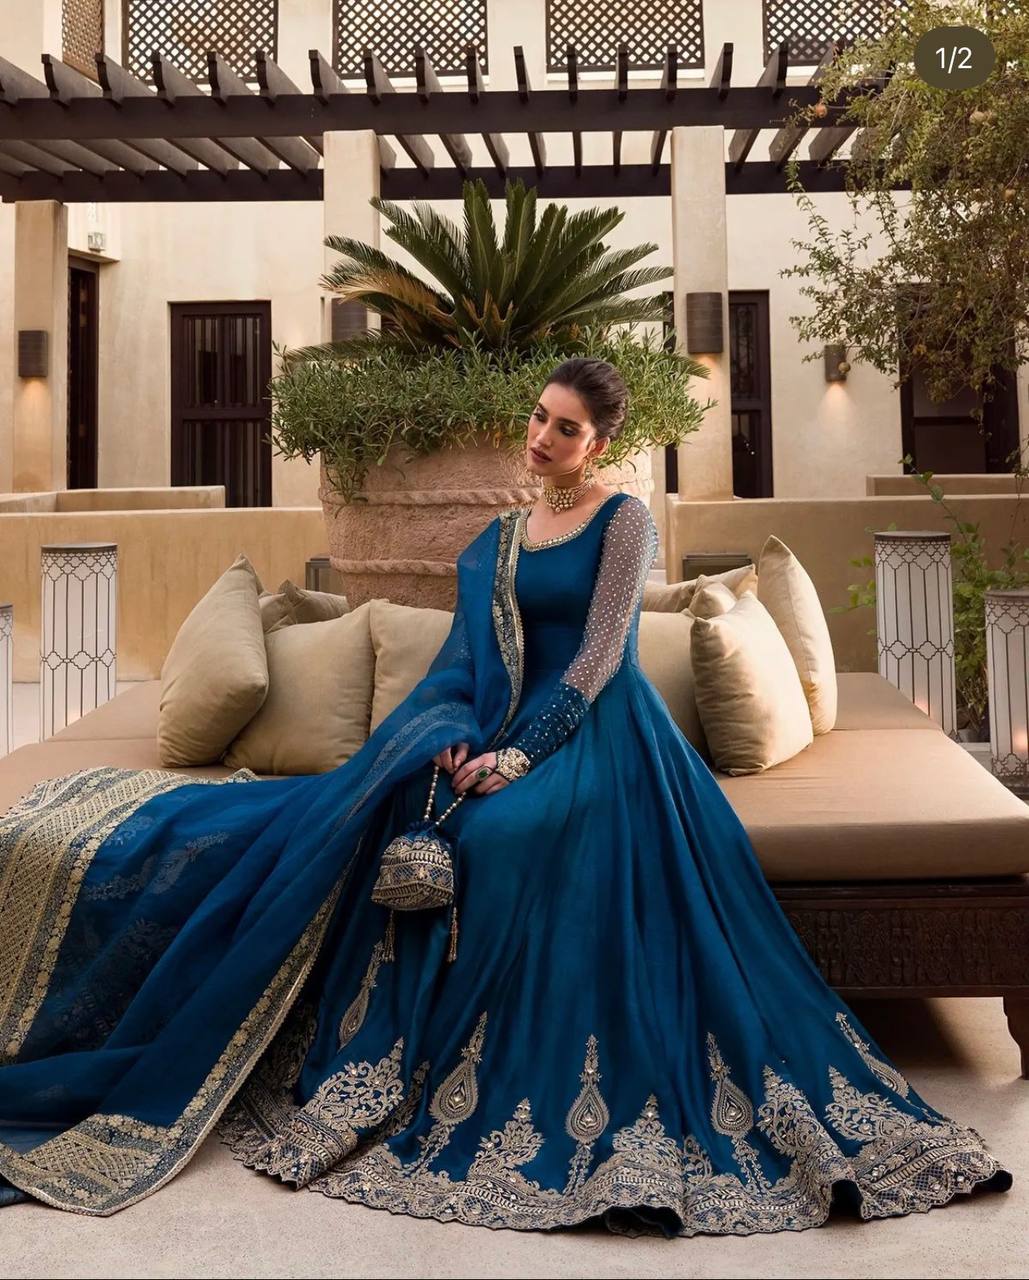 Gown & Maxi Dresses - Buy Gown & Maxi Dresses Online at Best Price in India